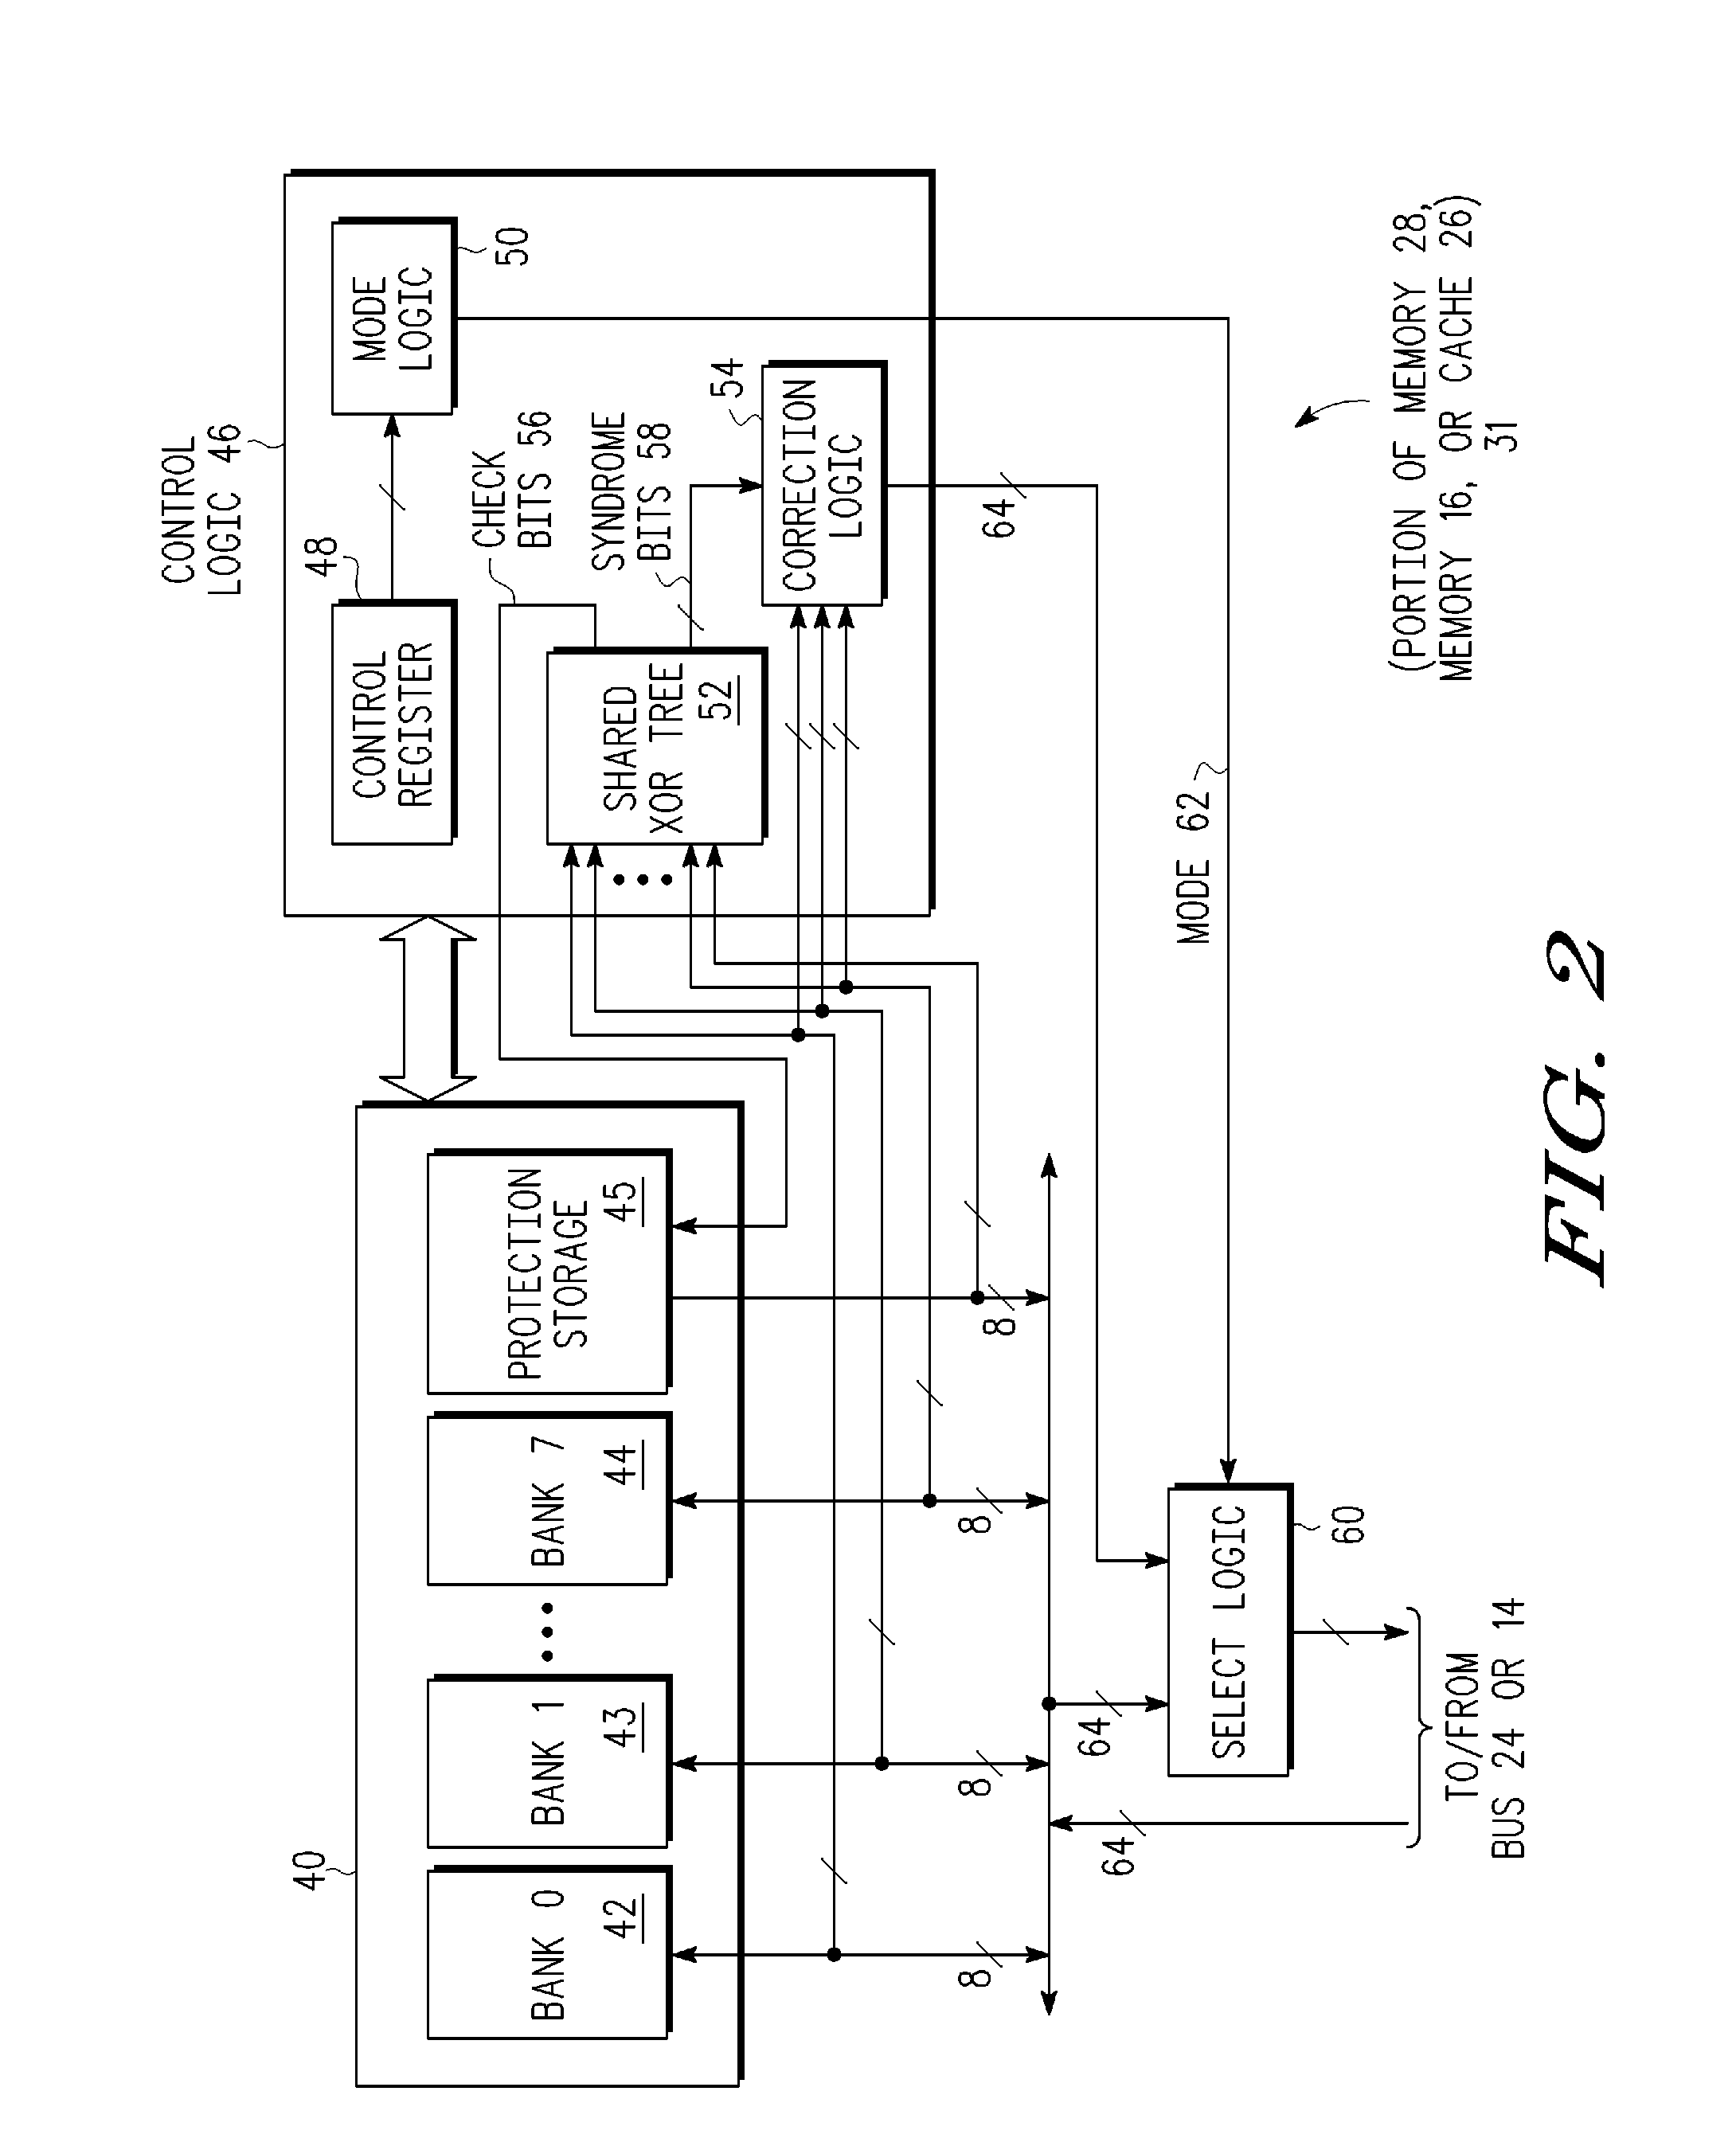 Configurable pipeline based on error detection mode in a data processing system